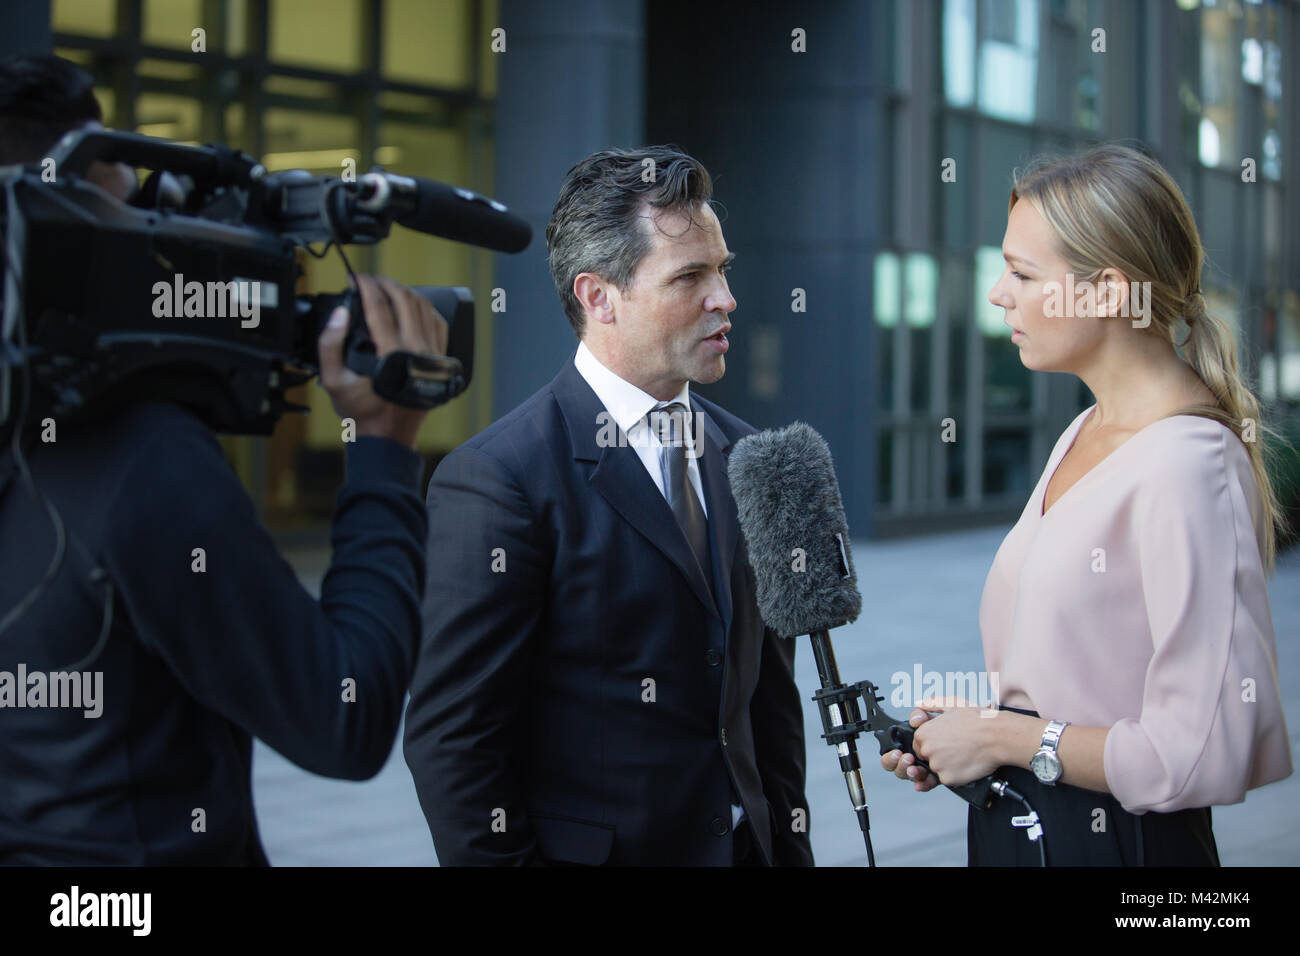 Businessman being interviewed on the street Stock Photo